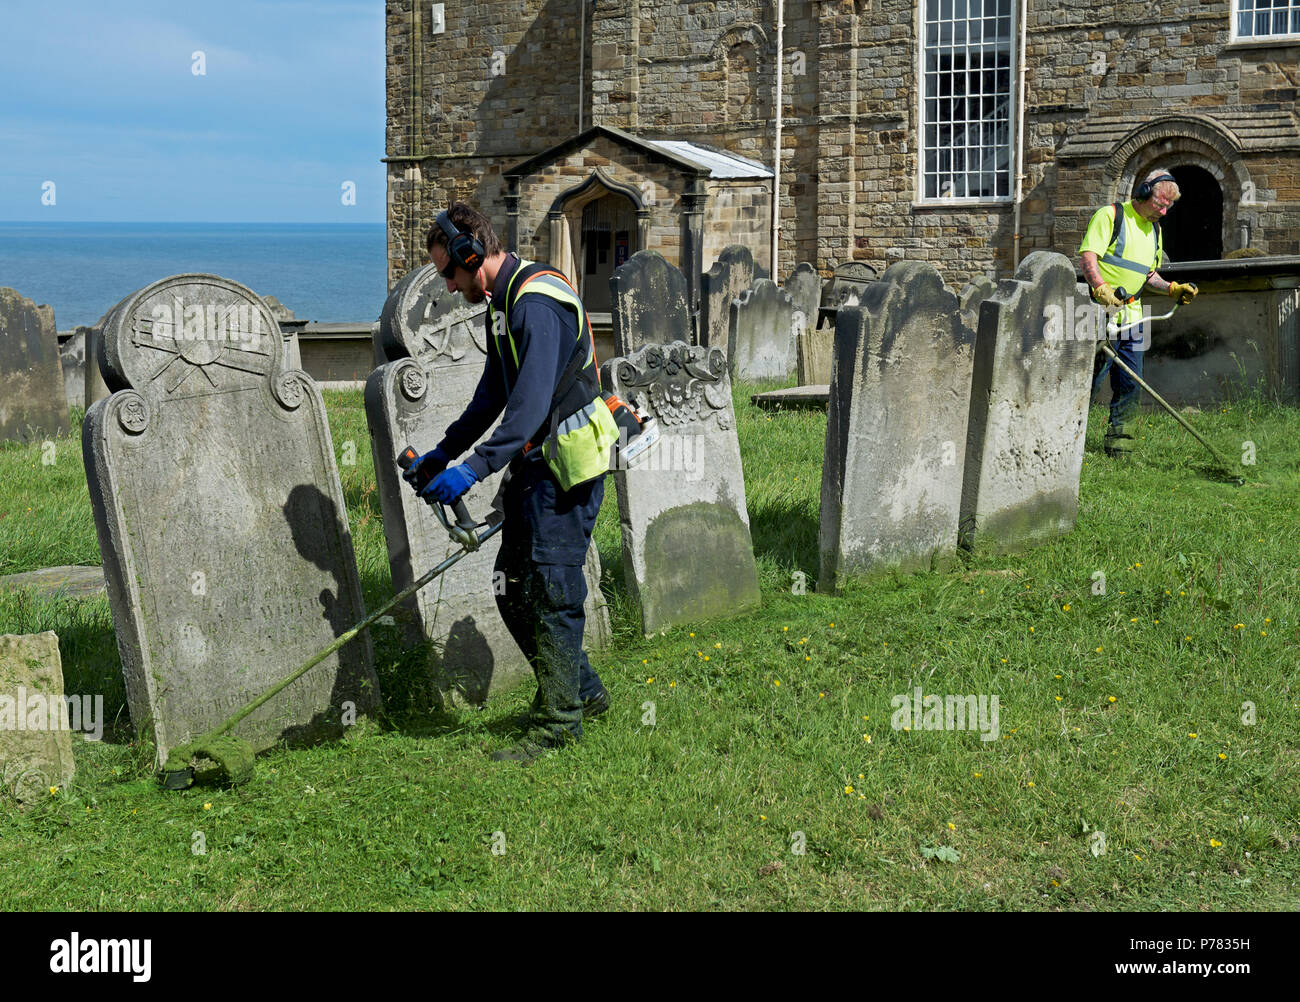 Jardiniers strimming, St Mary's Church, Whitby, North Yorkshire, England UK Banque D'Images